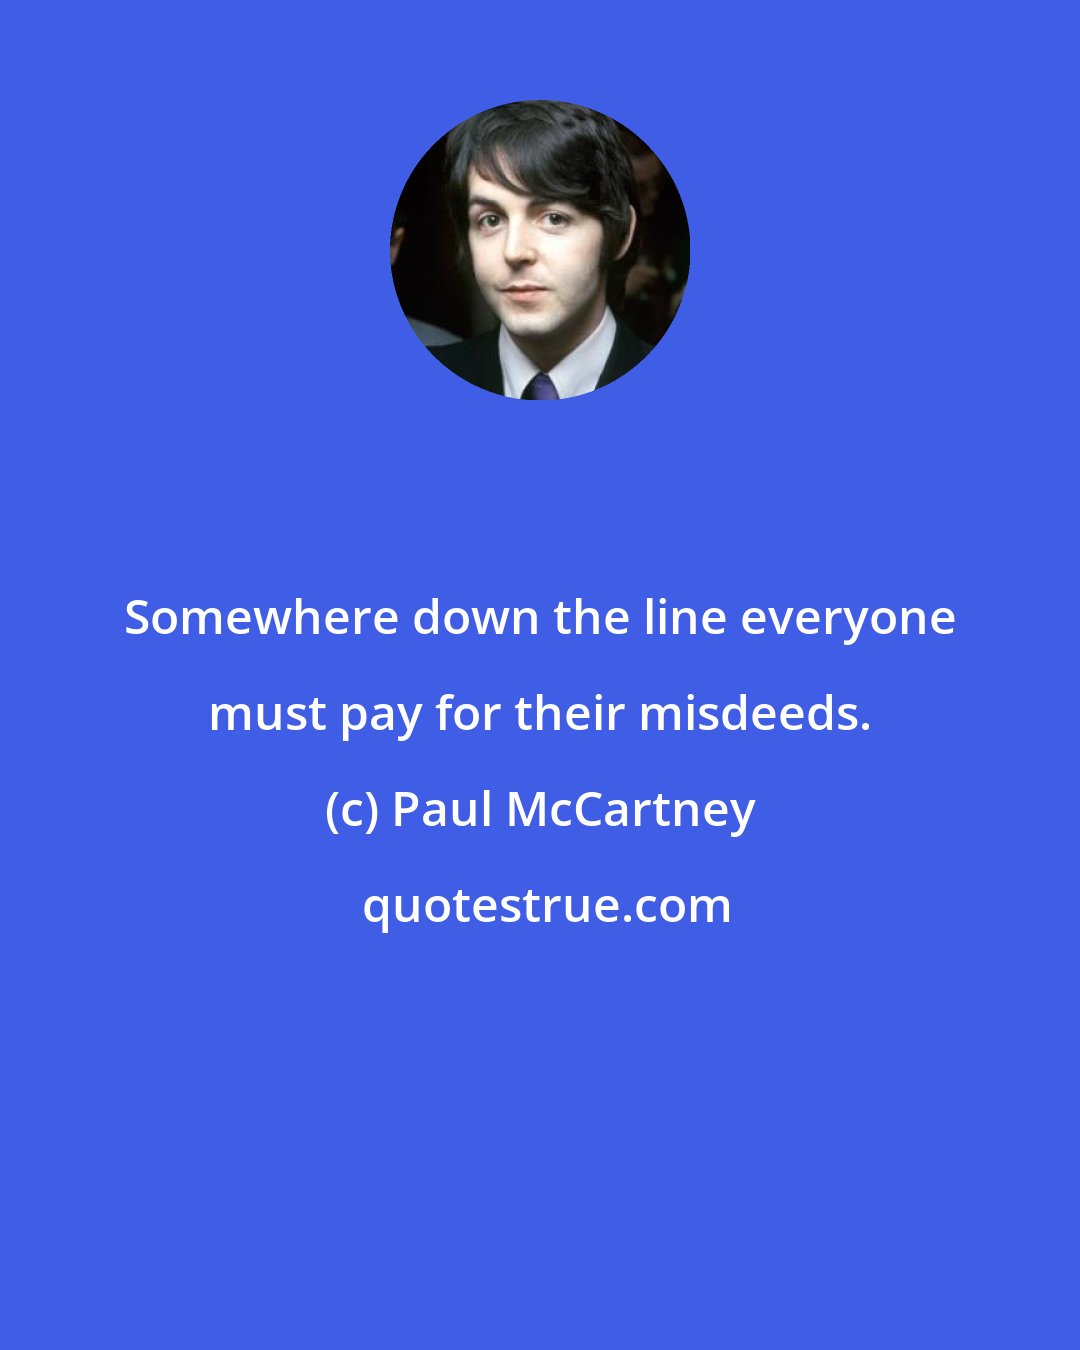 Paul McCartney: Somewhere down the line everyone must pay for their misdeeds.